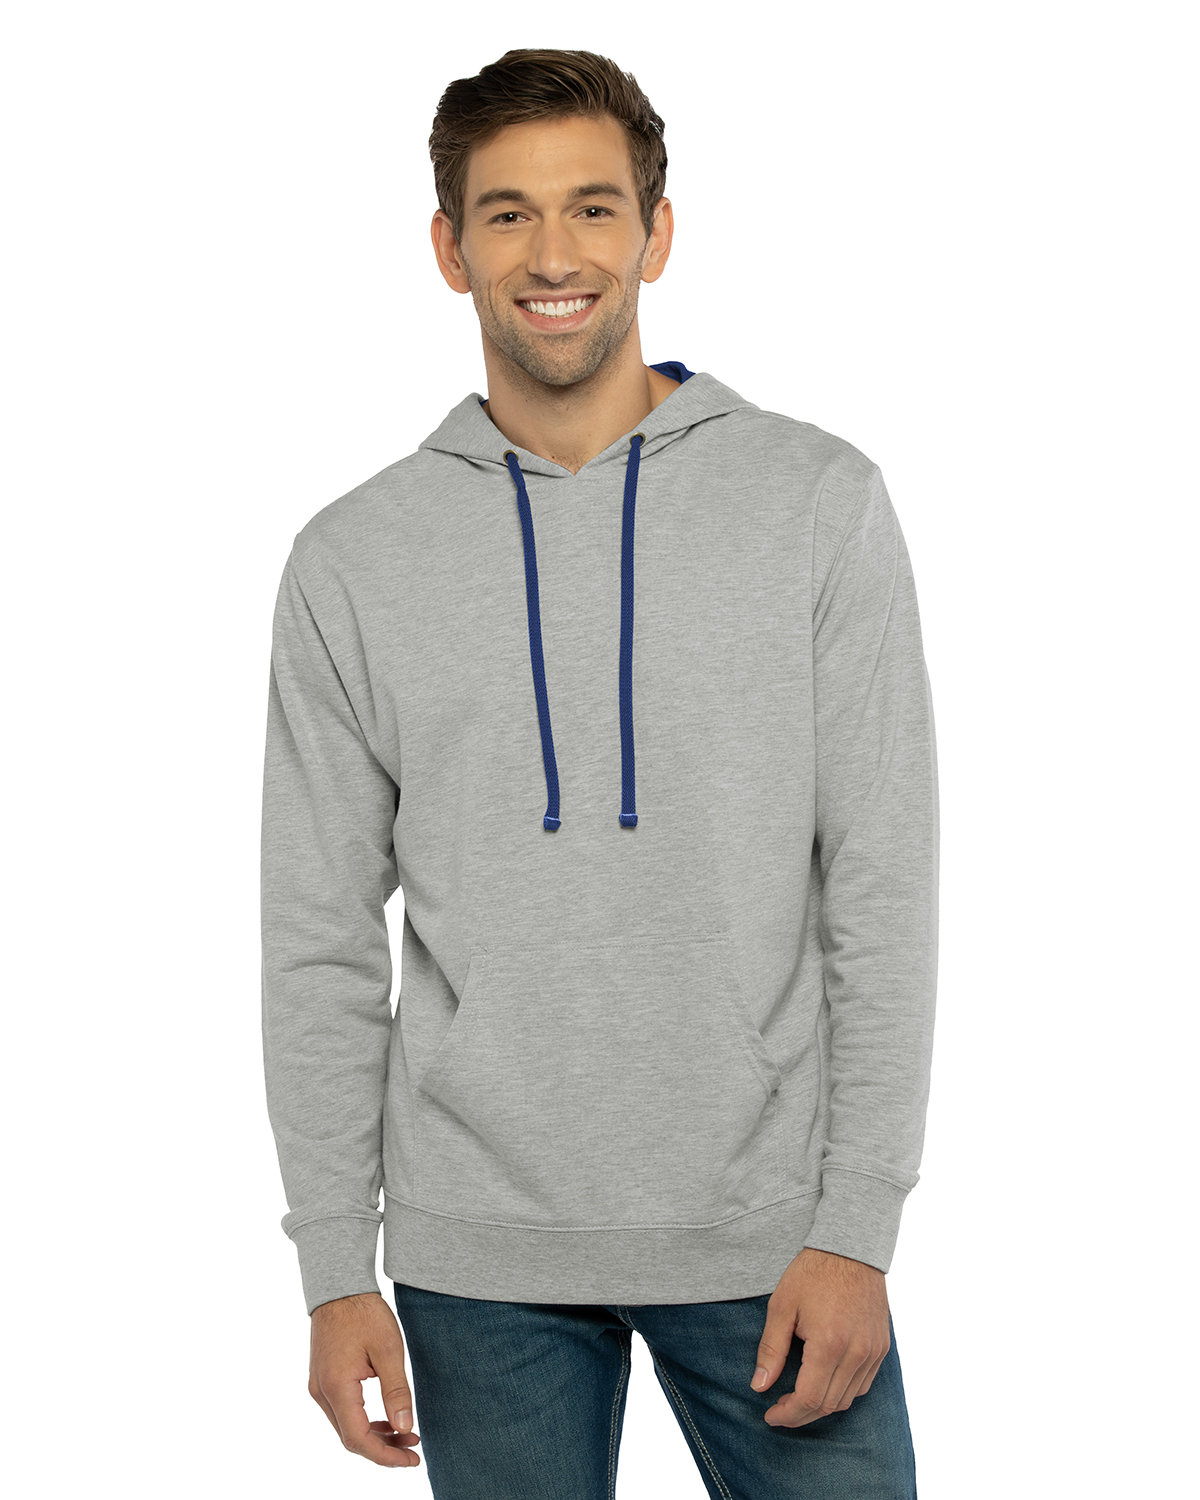 Next Level Apparel Unisex French Terry Pullover Hoodie HTHR GREY/ ROYAL 